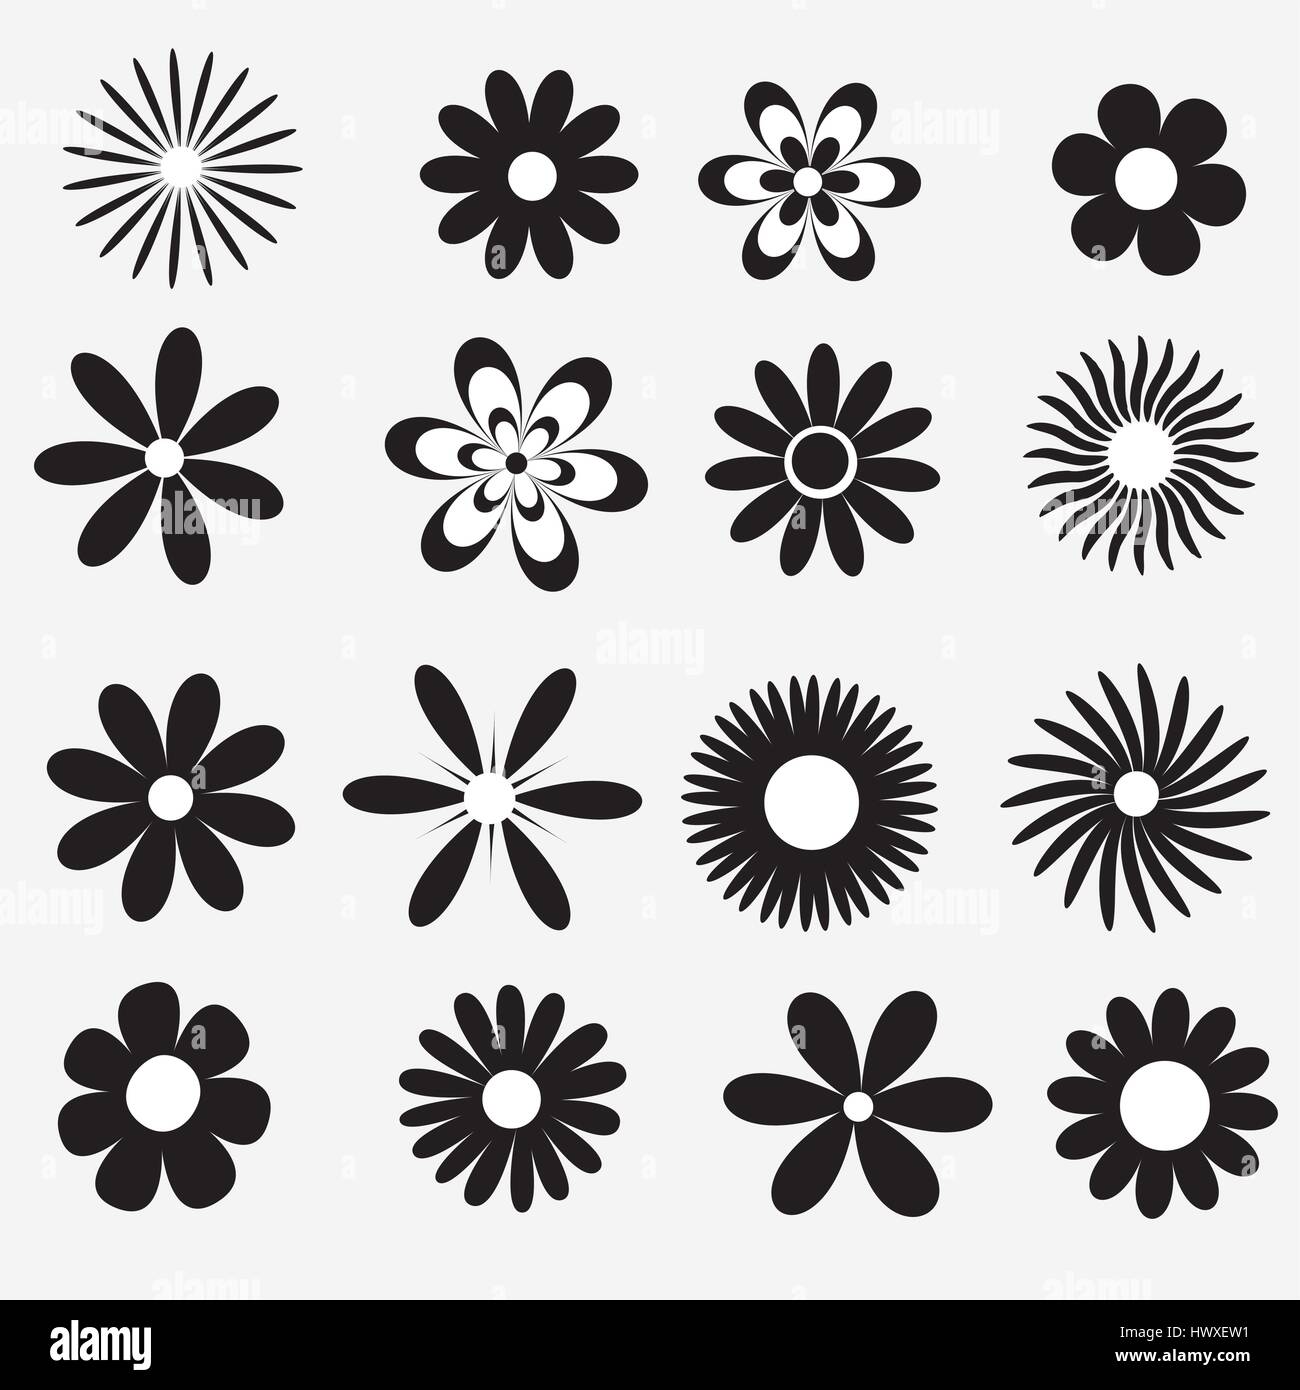 Silhouette flowers Stock Vector Images - Alamy